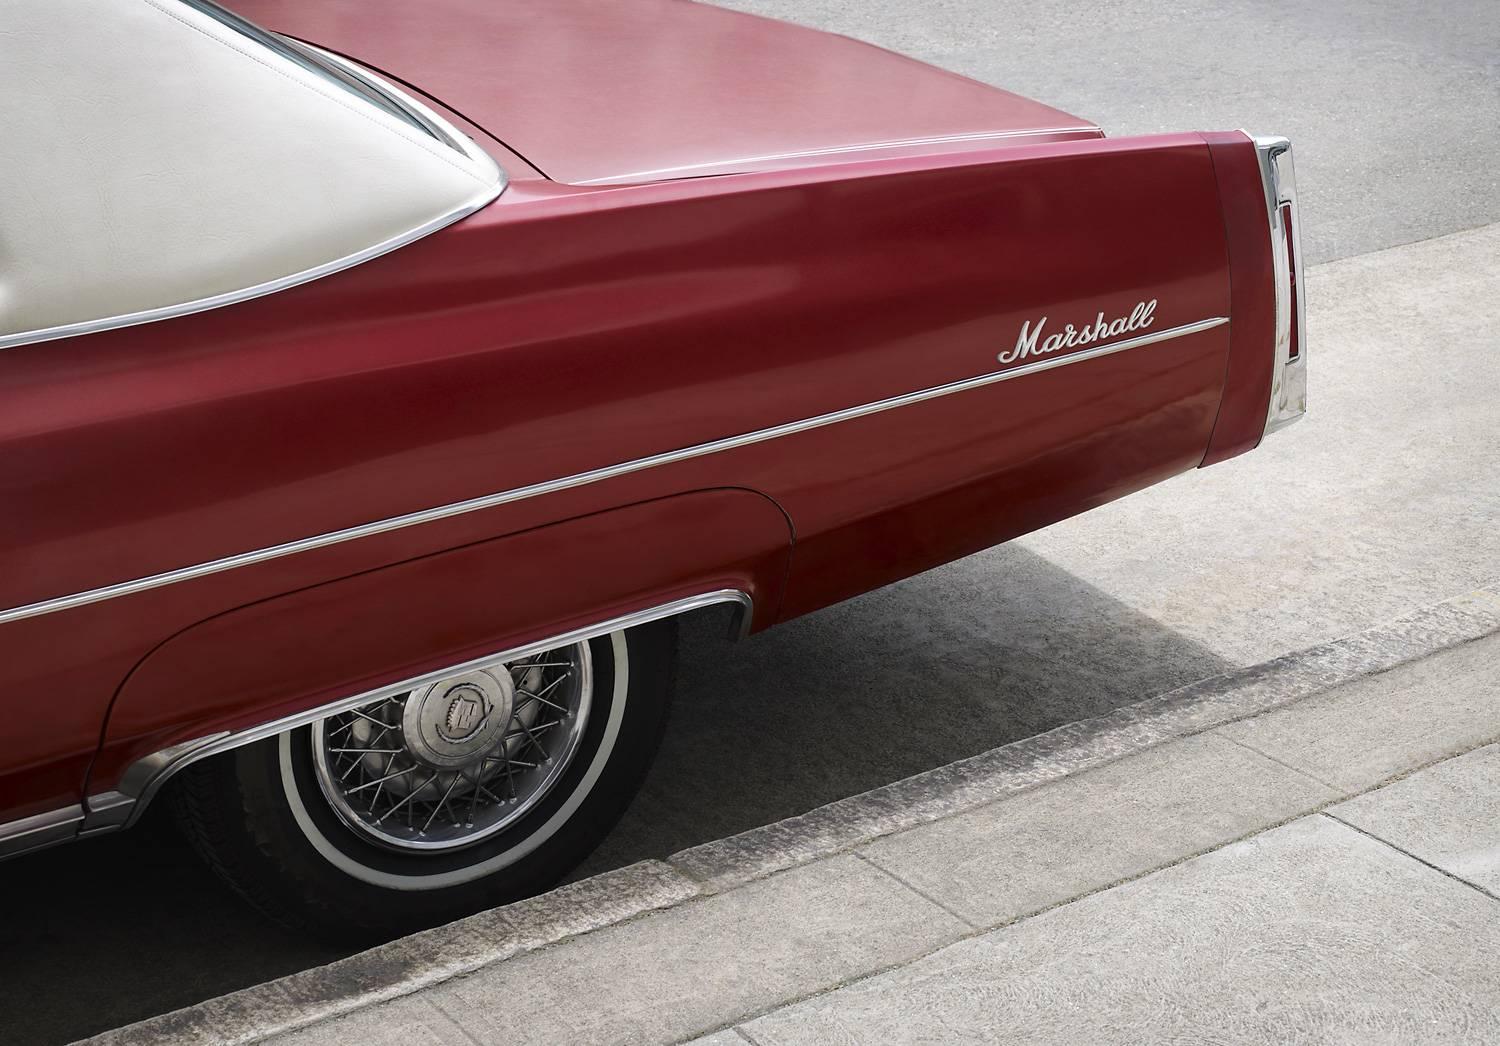 Marshall - large format photograph of iconic cherry red Cadillac automobile